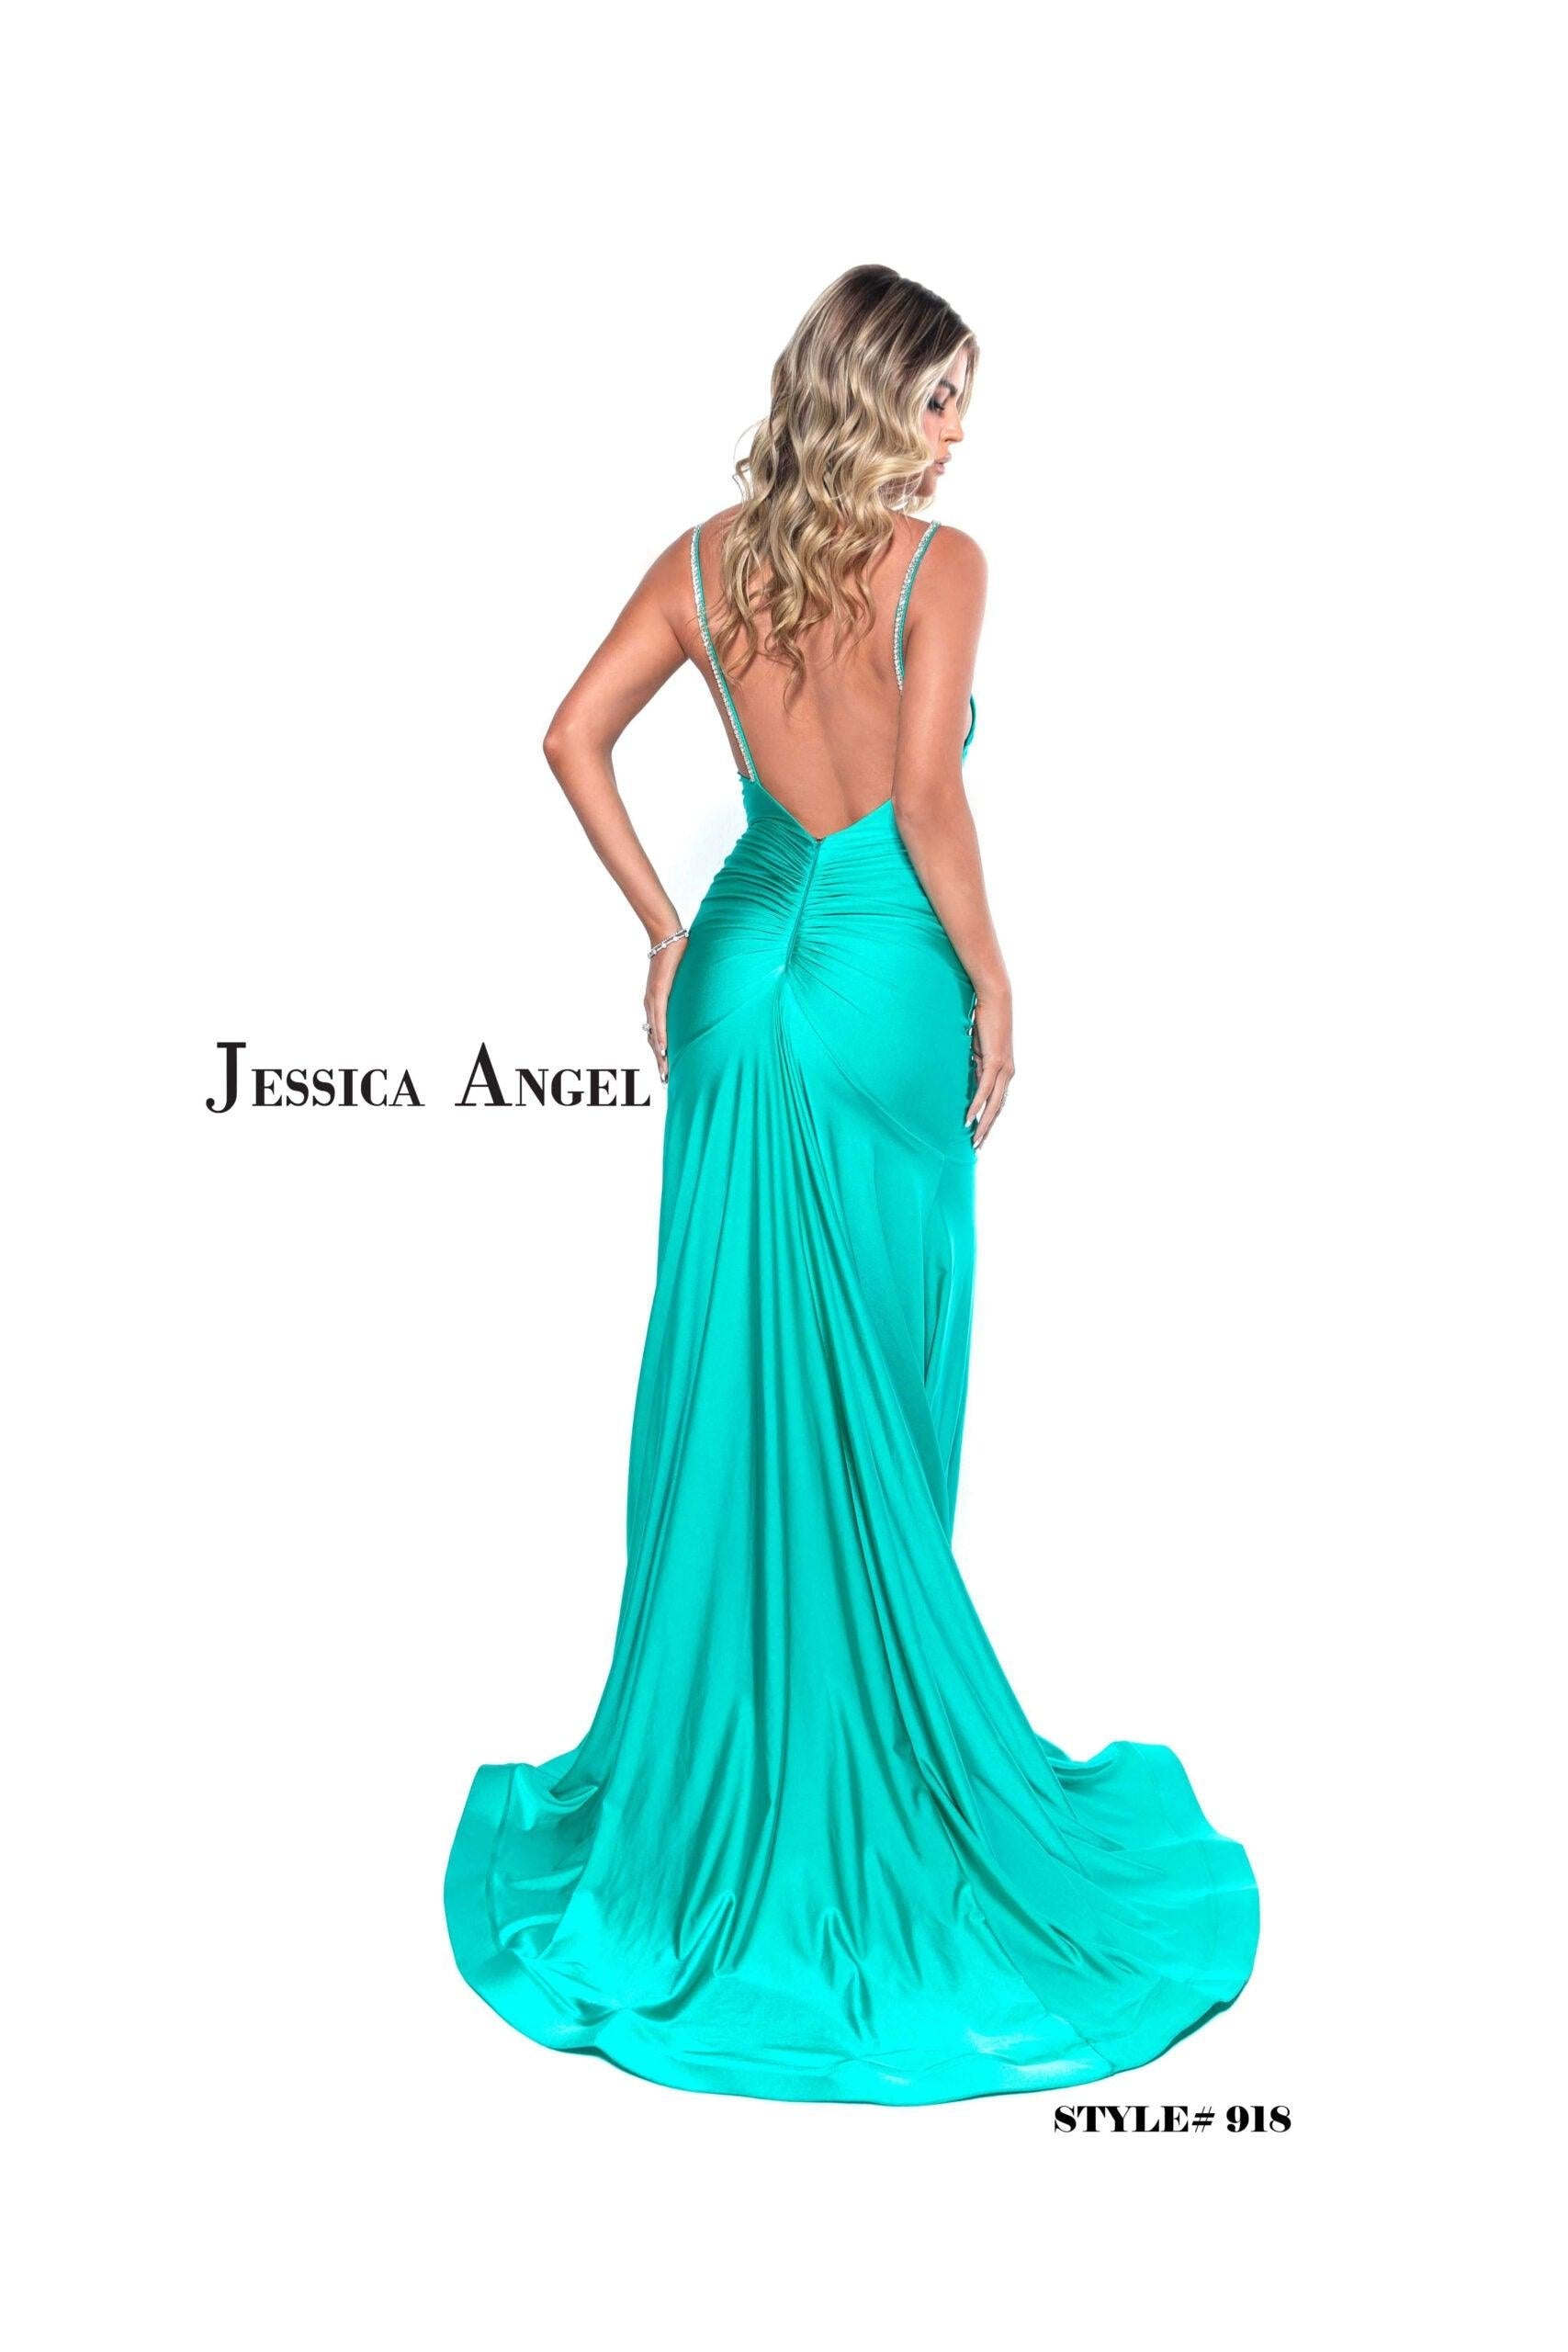 Jessica Angel Spaghetti Strap Long Fitted Dress 918 - The Dress Outlet